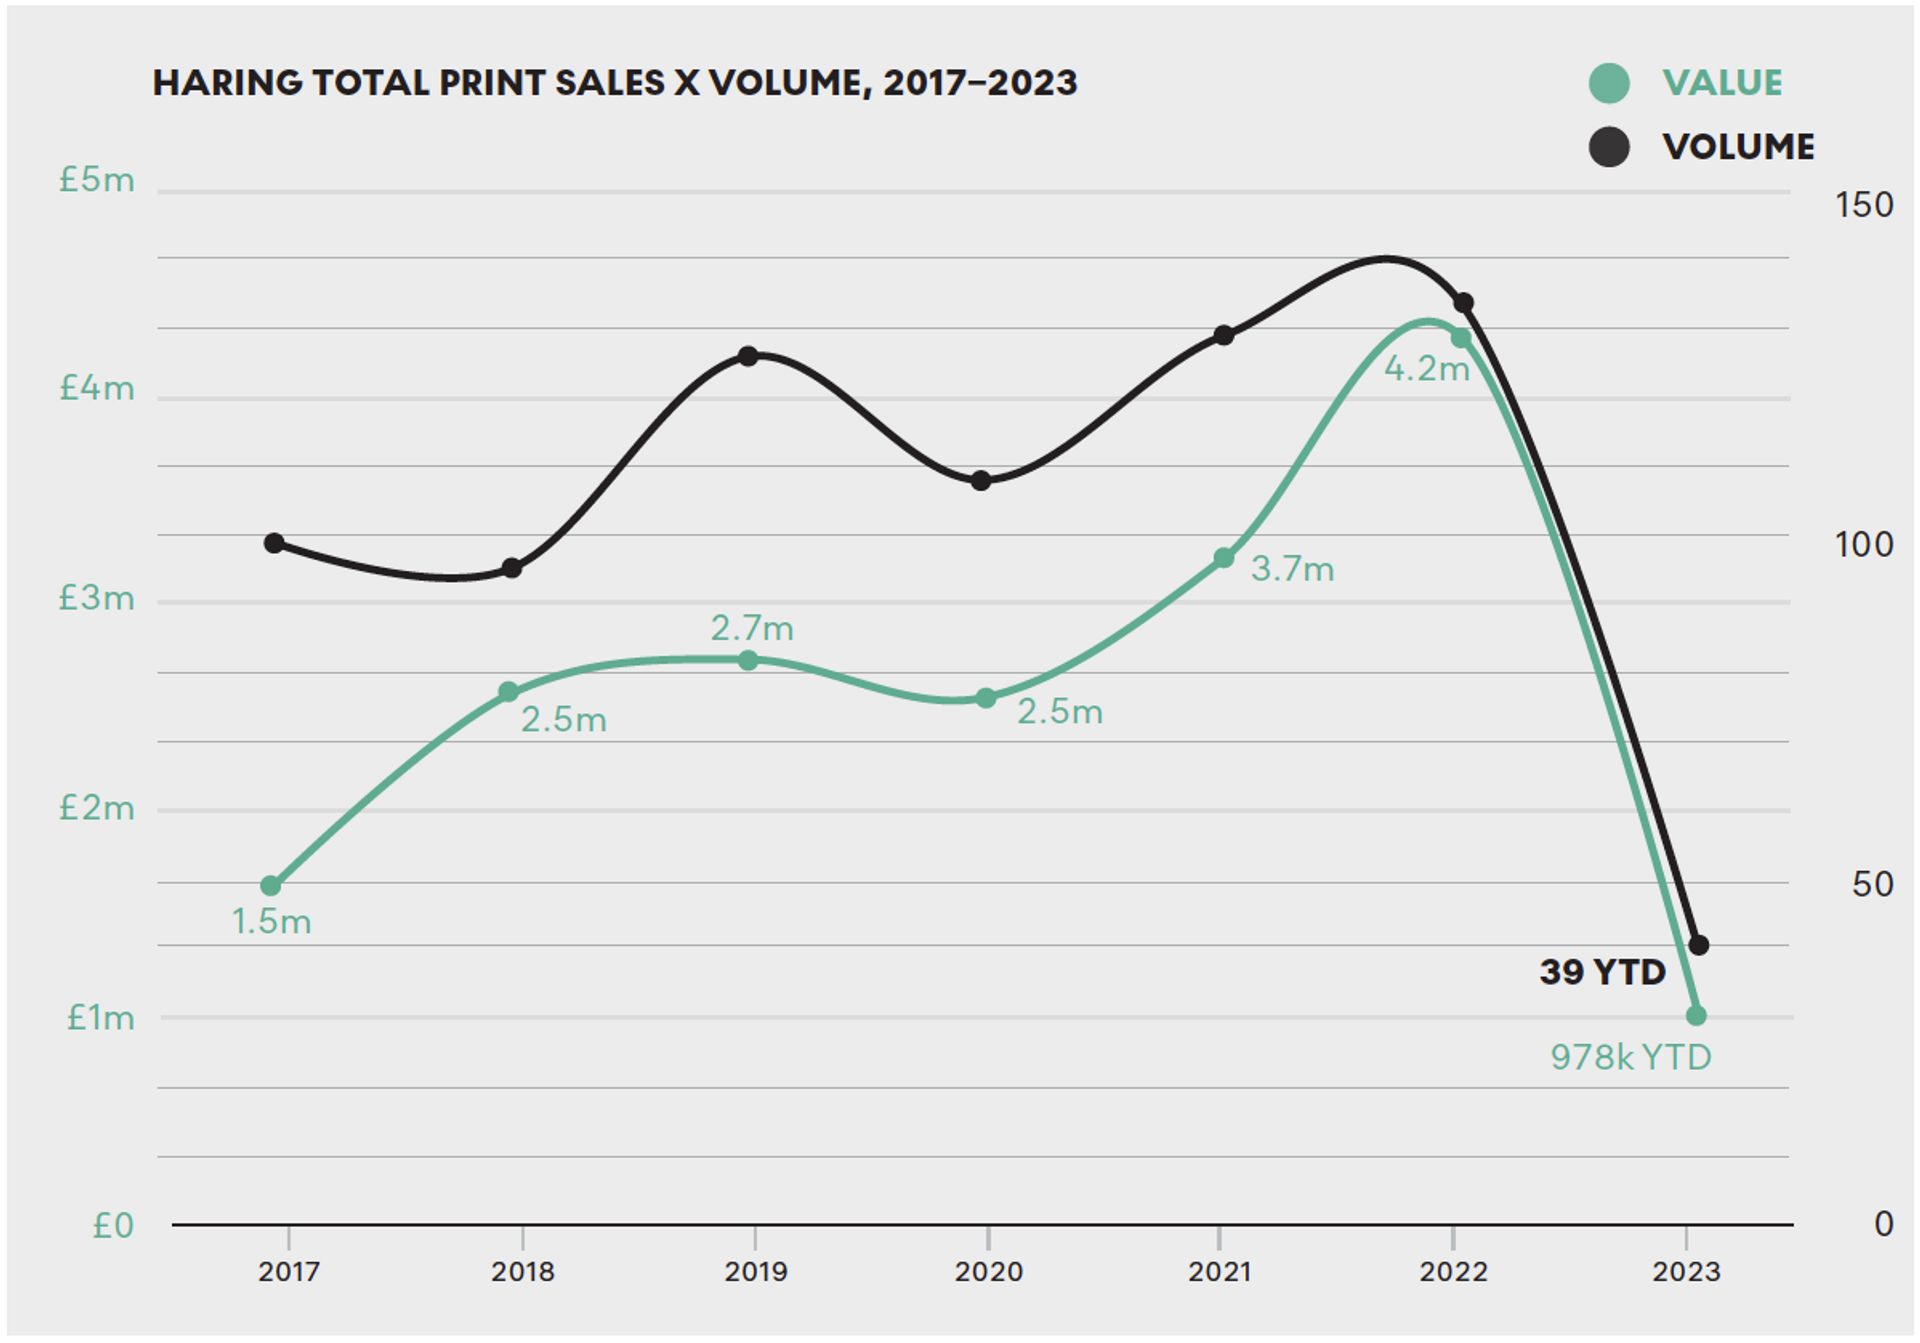 A visual representation of Keith Haring's print sales turnover by volume, depicted as a double line graph spanning from 2017 to 2023.